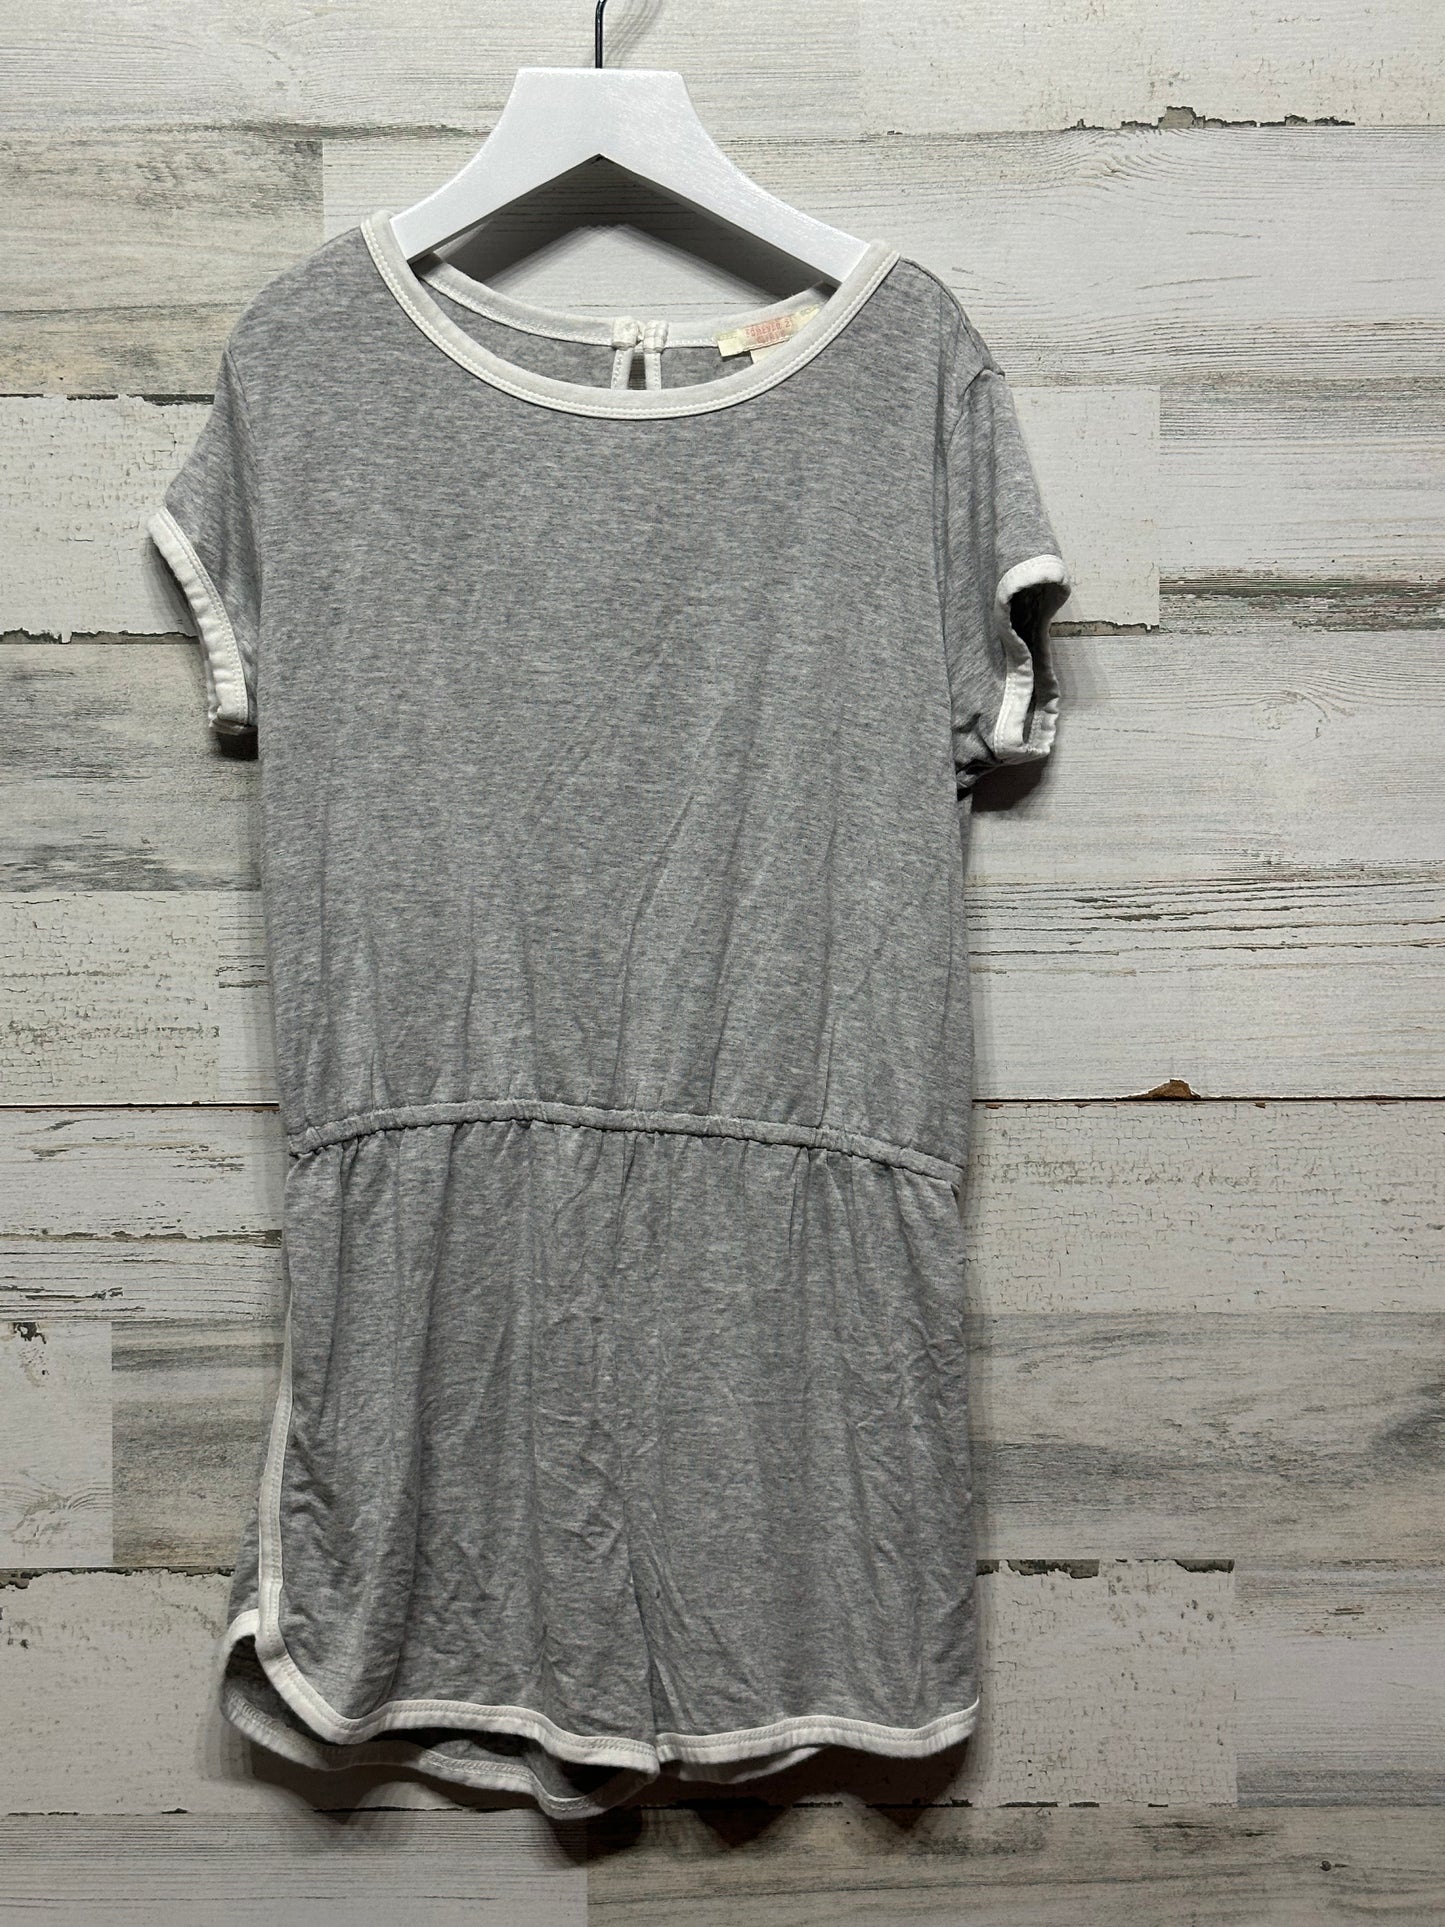 Girls Size 11/12 Forever 21 Girls Soft Grey Romper - Good Used Condition